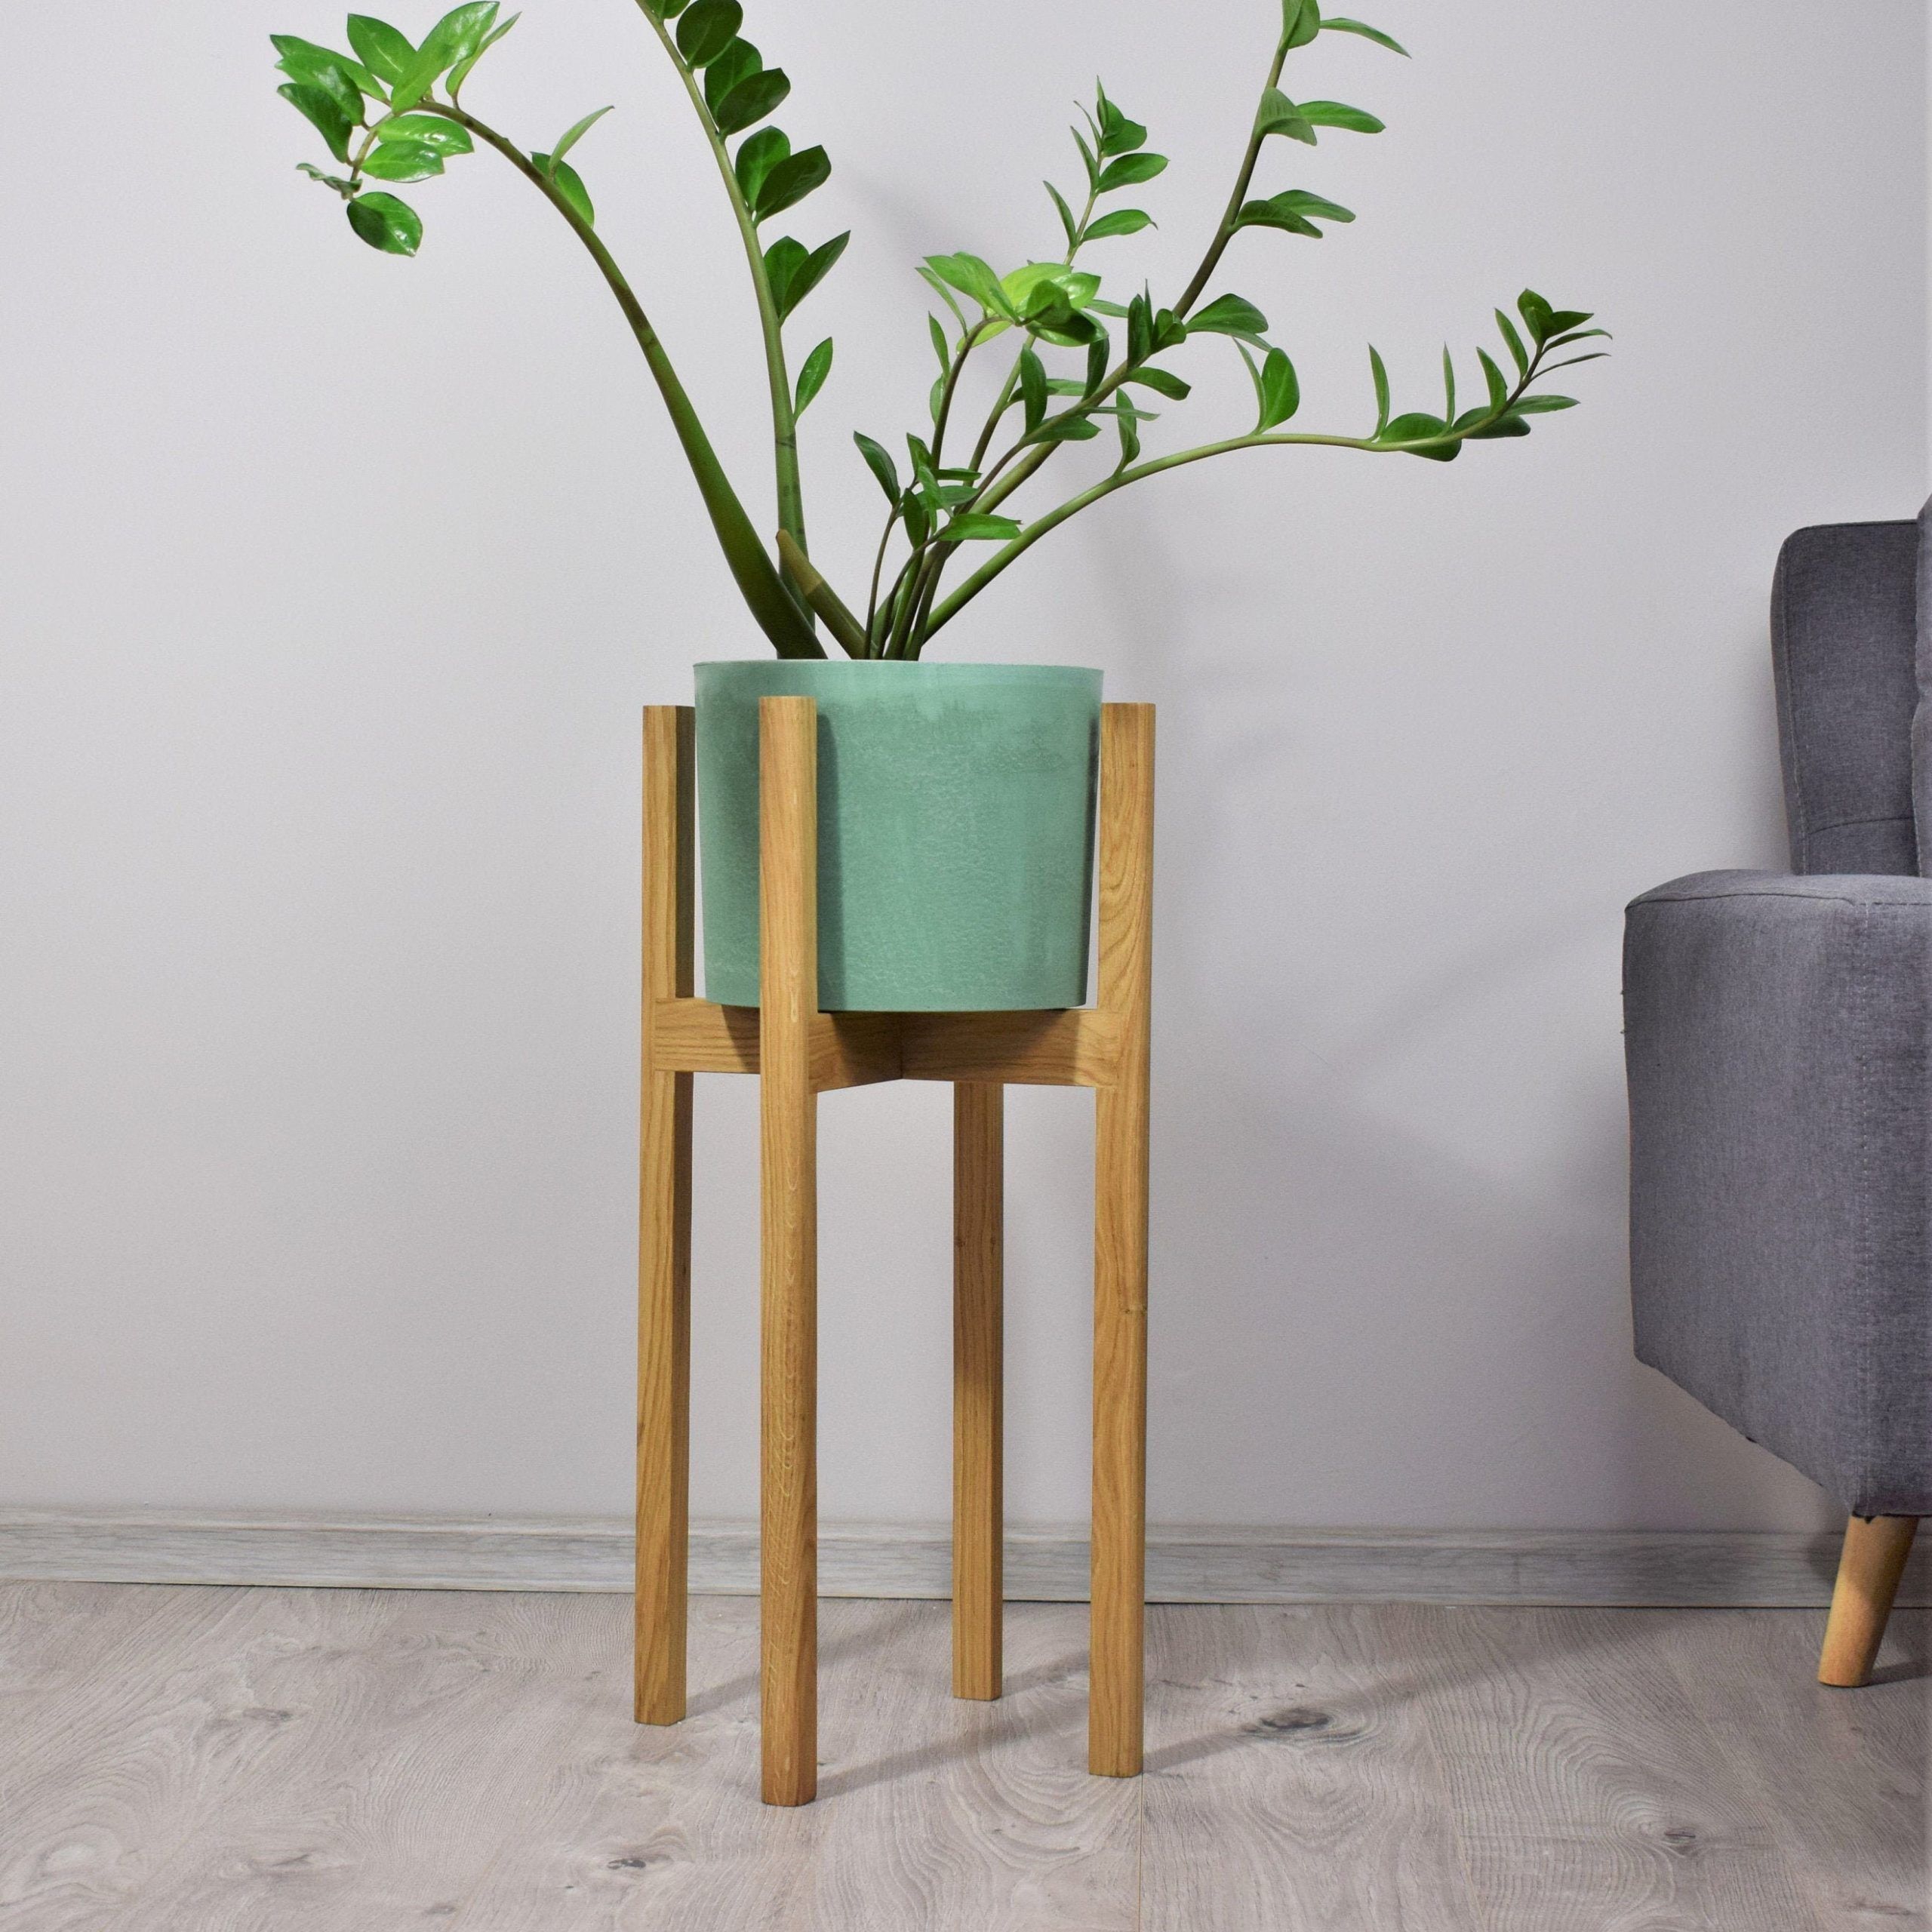 Tall Plant Stands Made Of Natural Oak Wood (View 3 of 15)